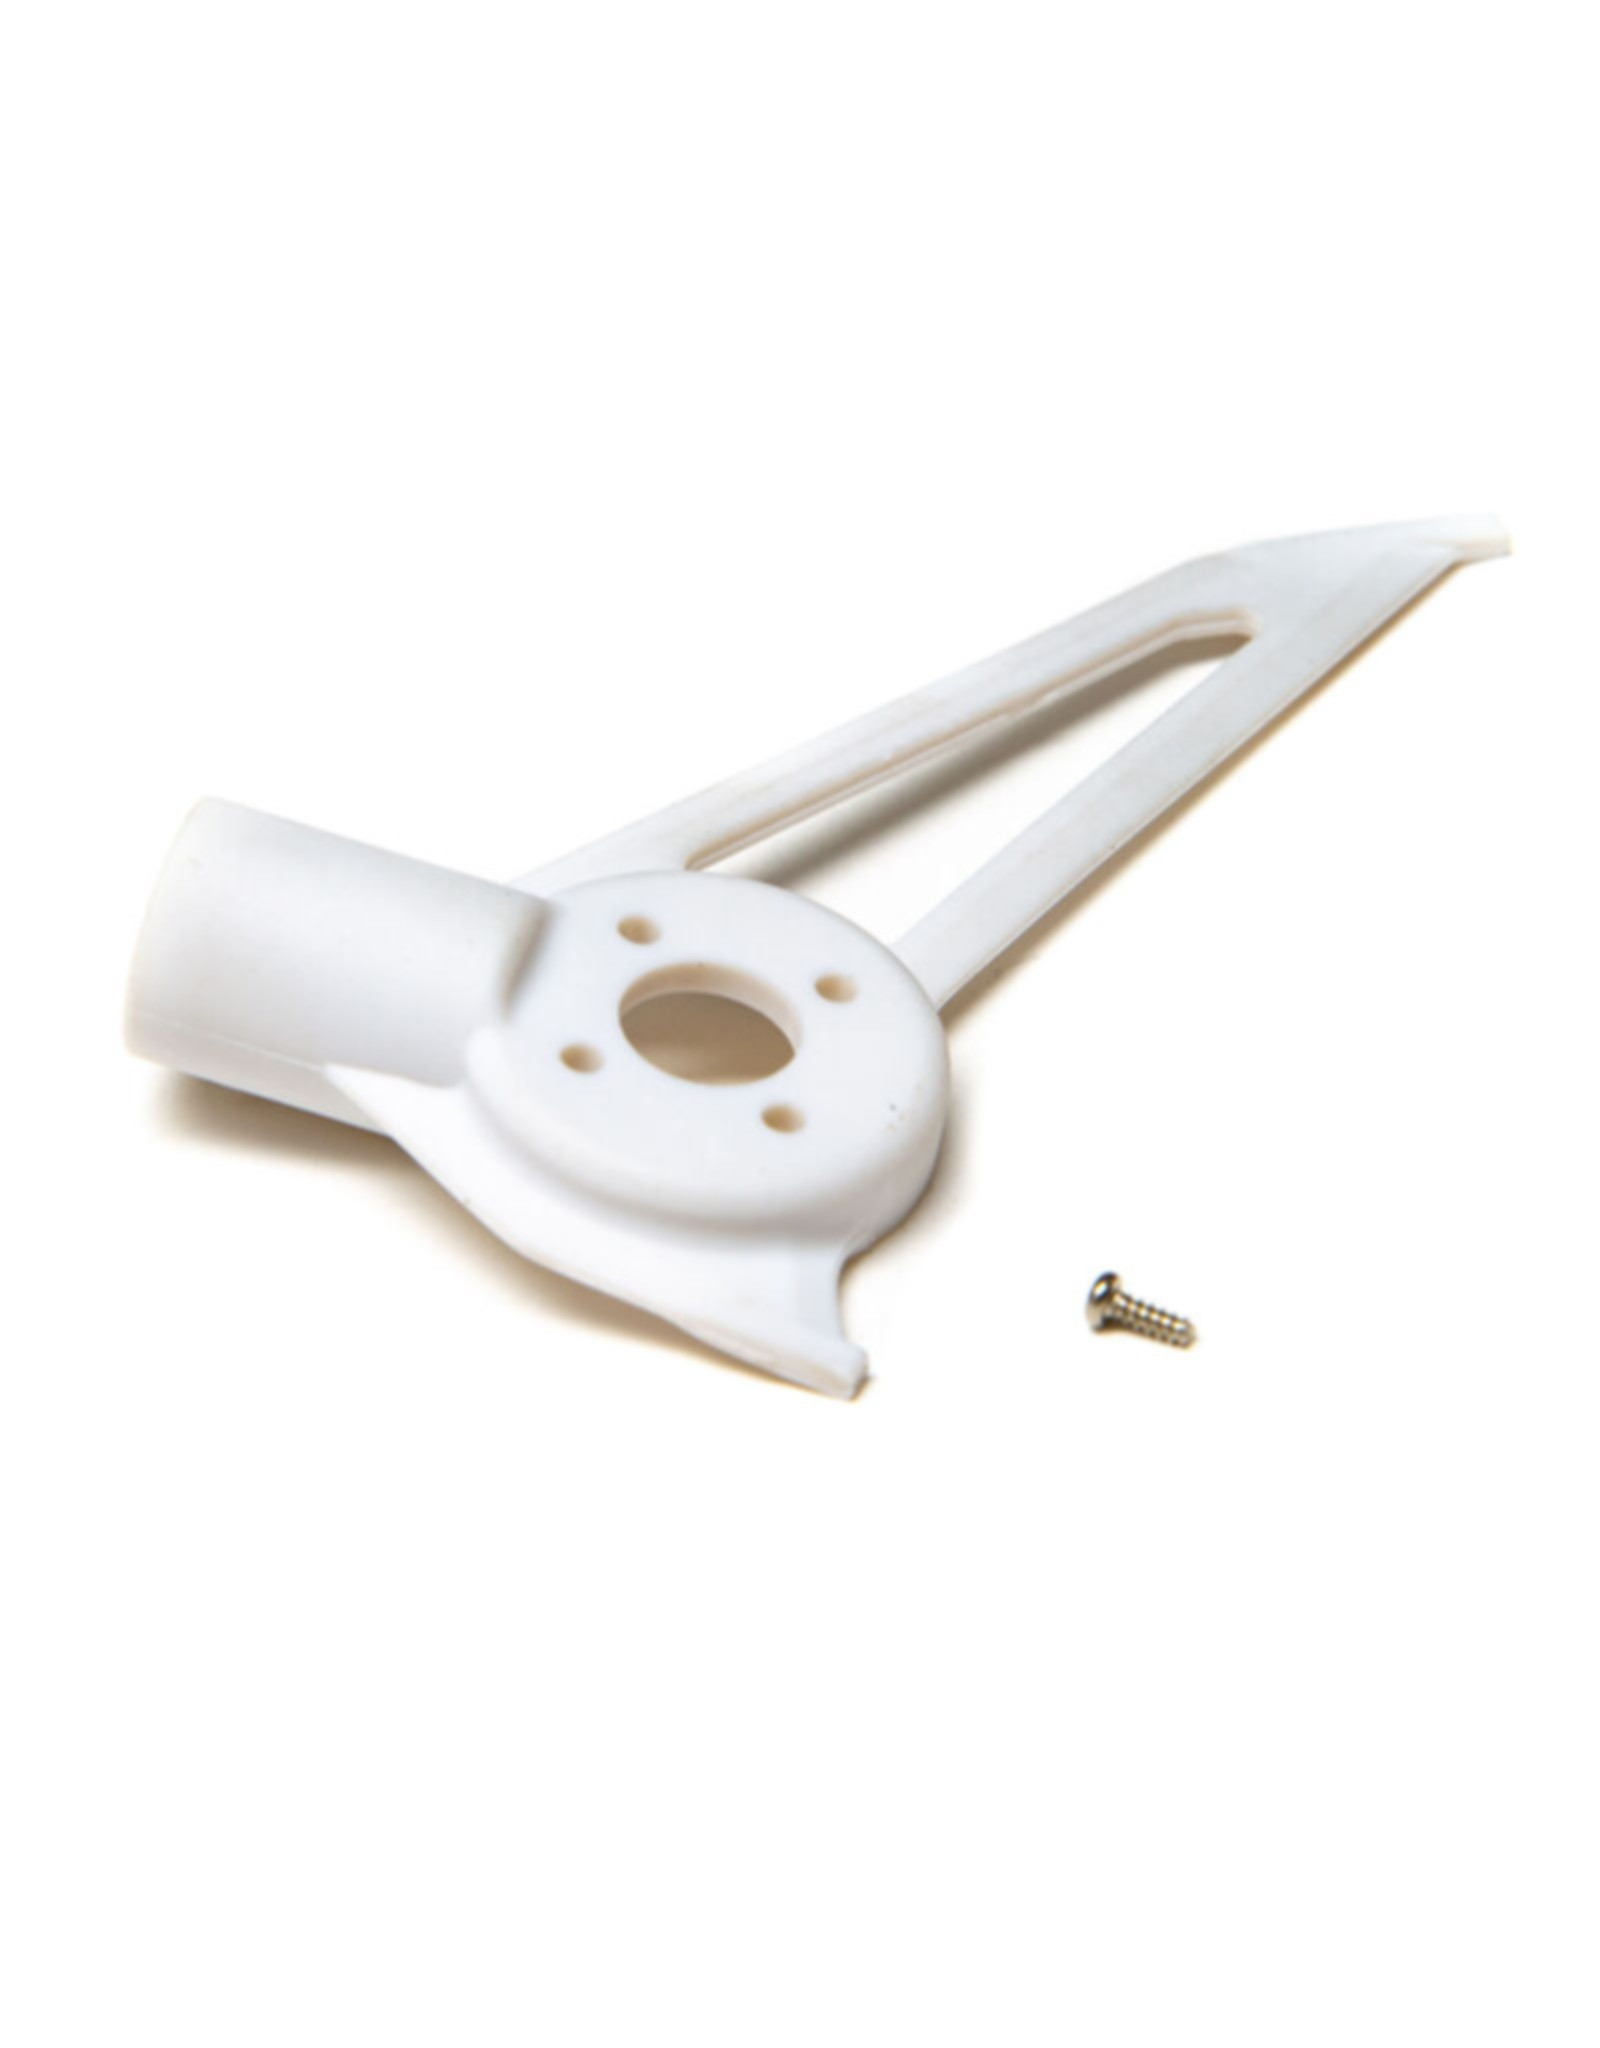 Blade BLH5404 Vertical Tail Fin/Motor Mount (White): 150 S